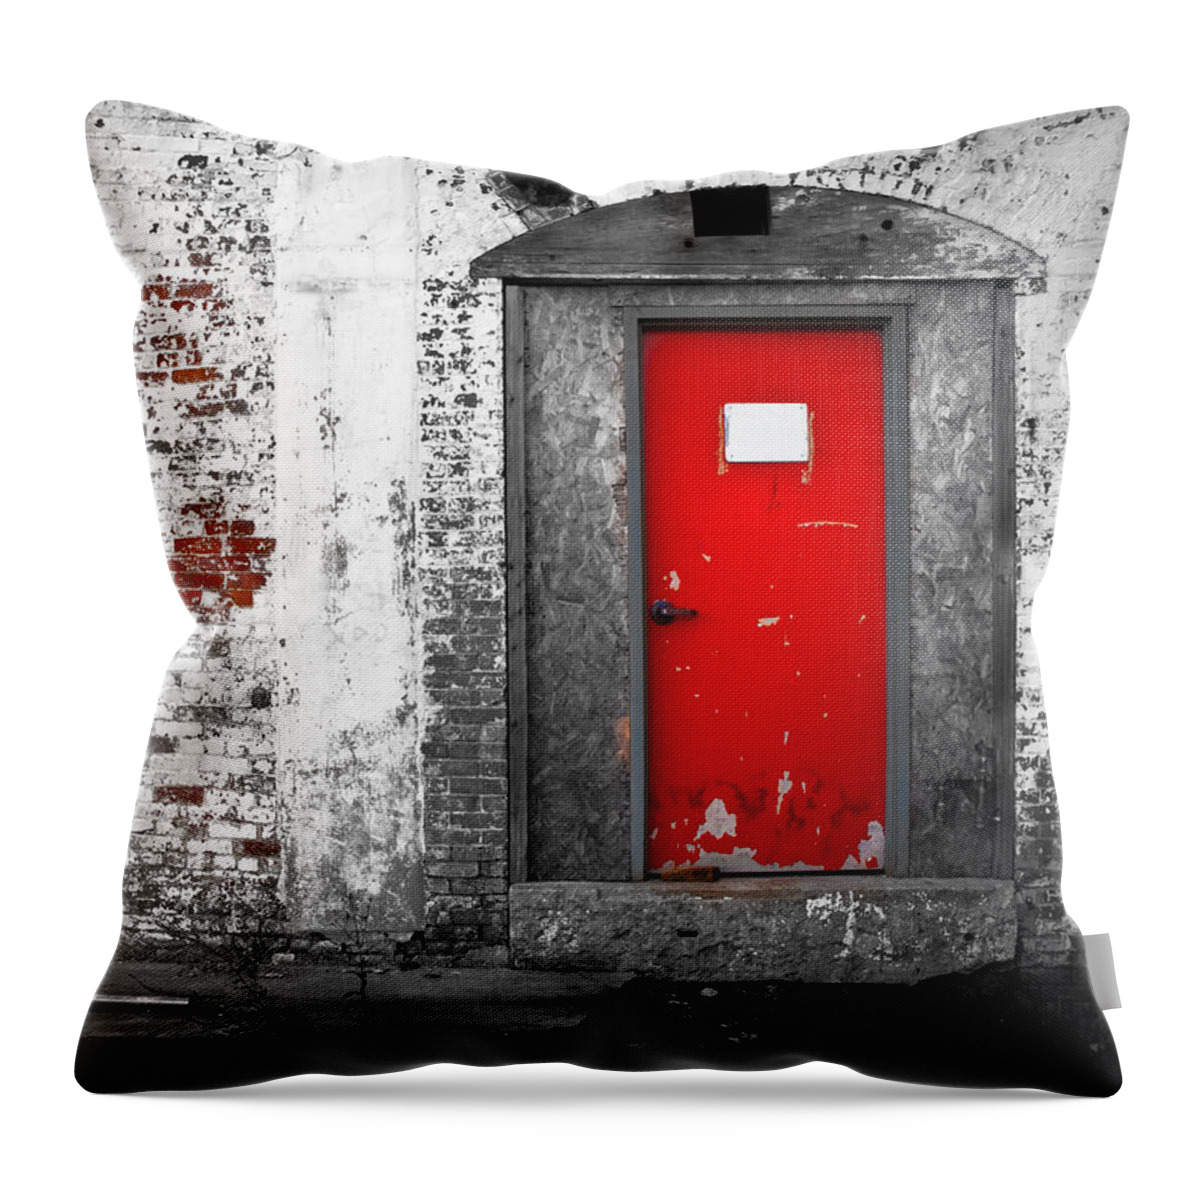 Huxley Throw Pillow featuring the photograph Red Door Perception by Bob Orsillo